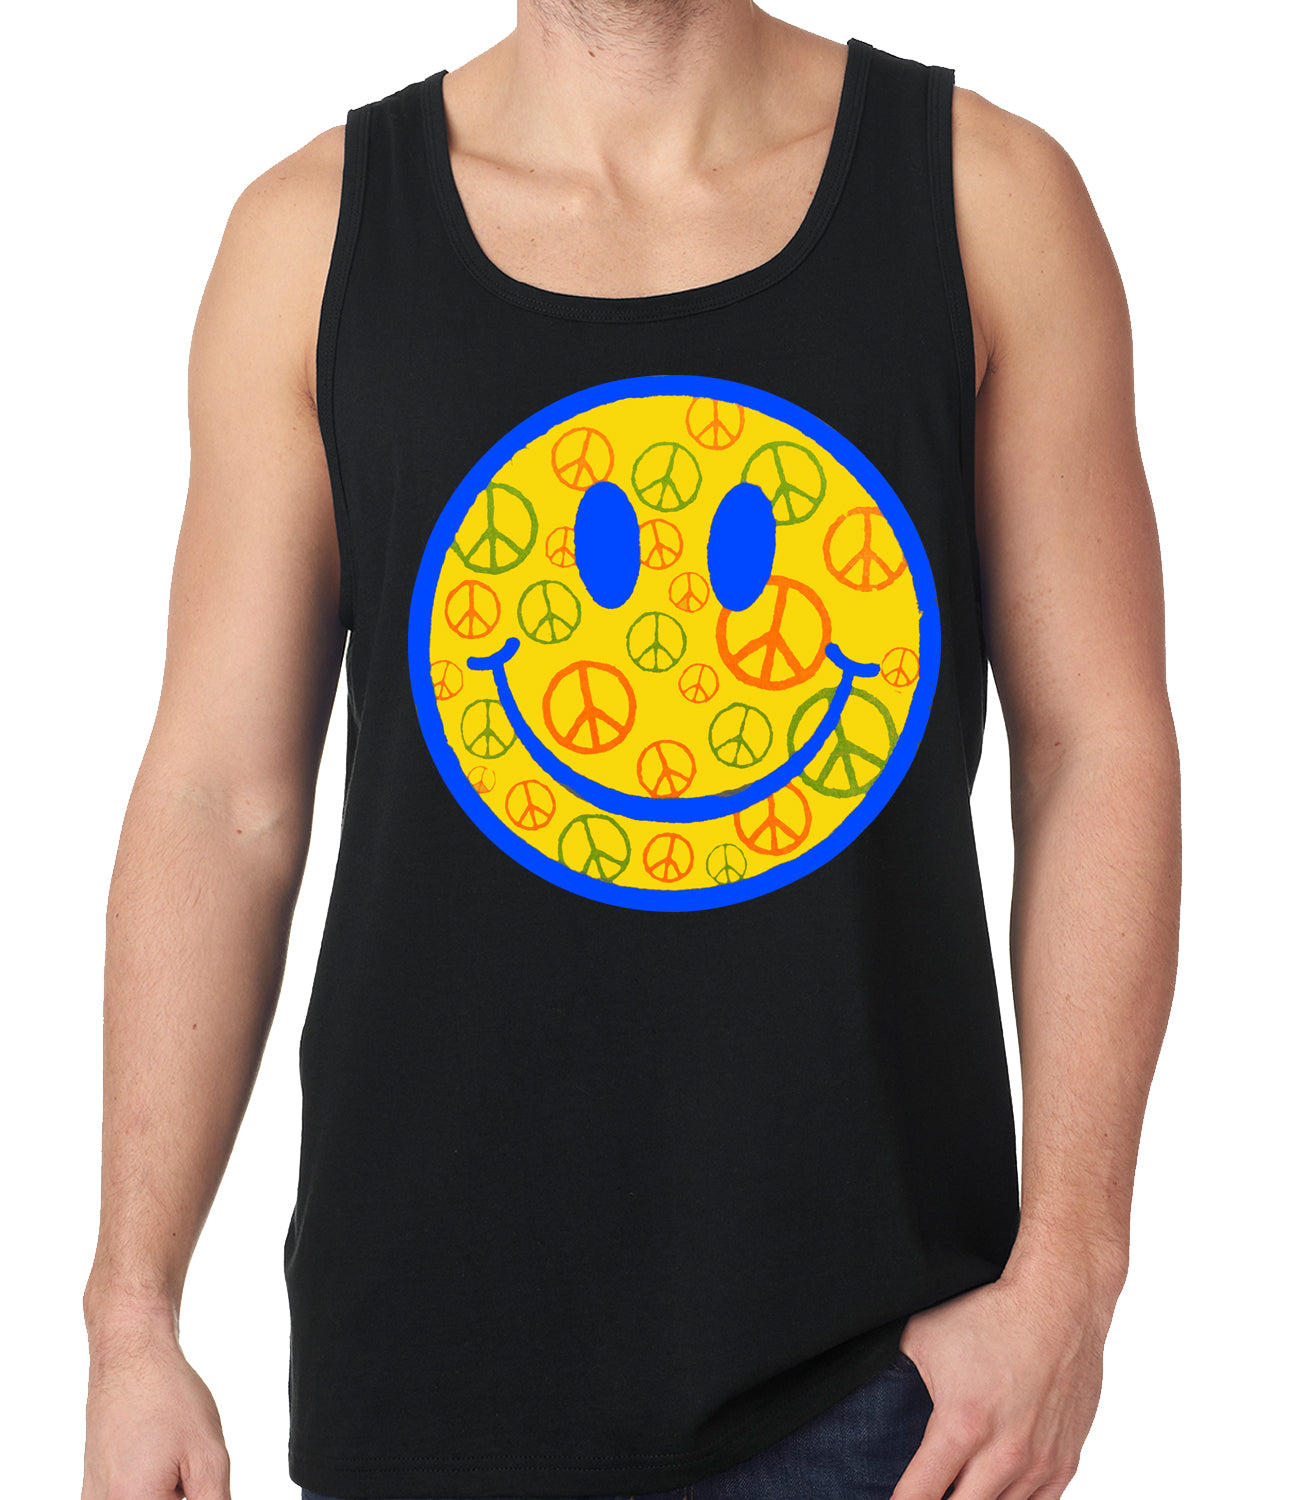 Smiley Face Peace Signs All Over Tank Top